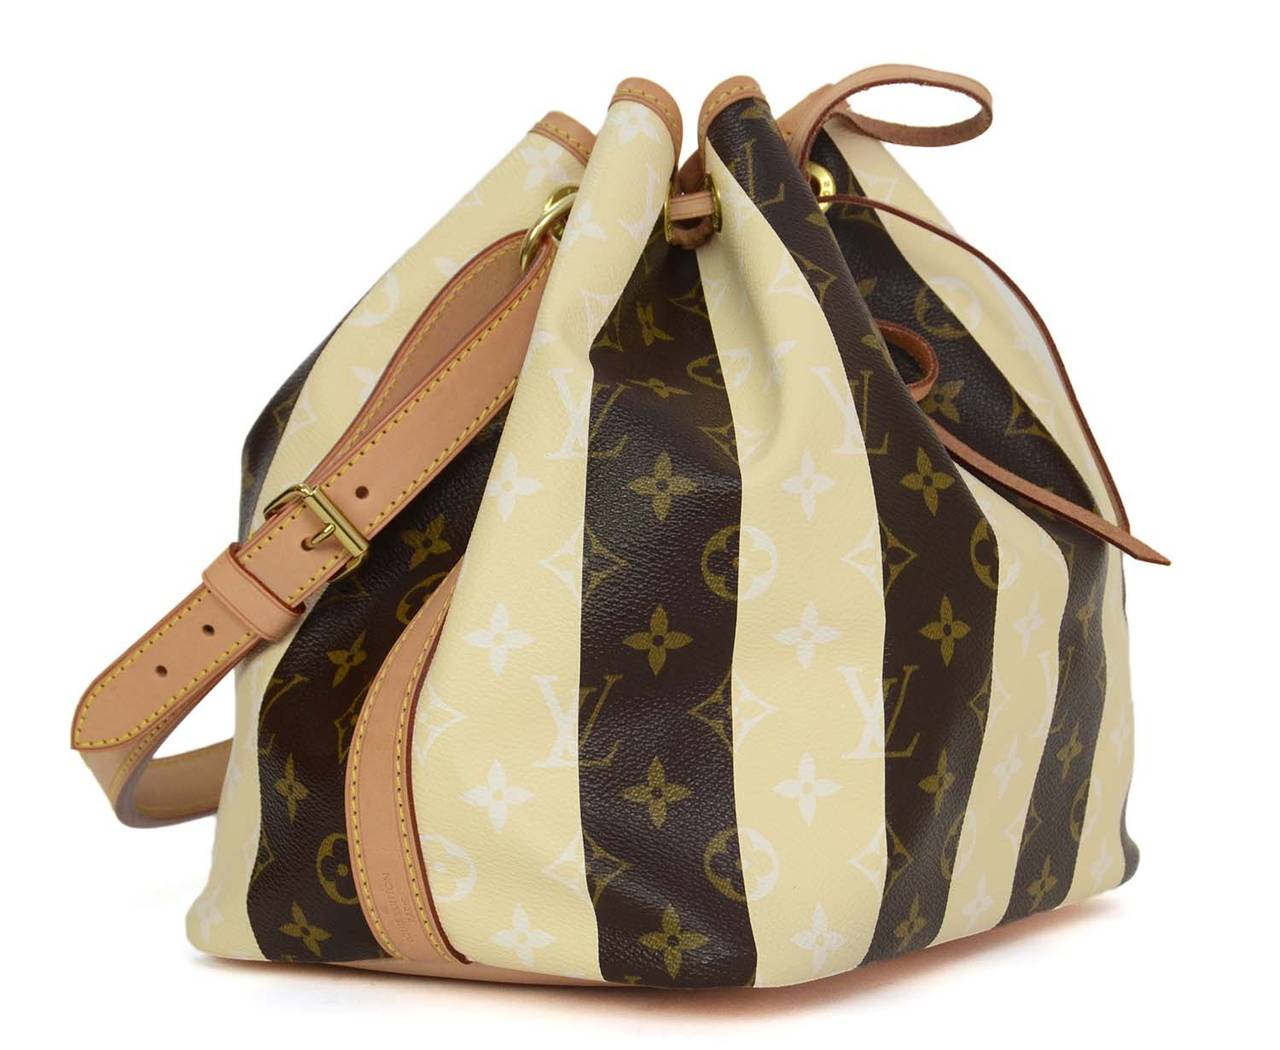 Louis Vuitton Monogram Rayures Canvas Ltd Ed. Noe Bag

    Made in: France
    Year of Production: 2011
    Color: Brown, tan, ivory and gold
    Hardware: Goldtone
    Materials: Coated canvas, leather and metal
    Lining: Ivory striped